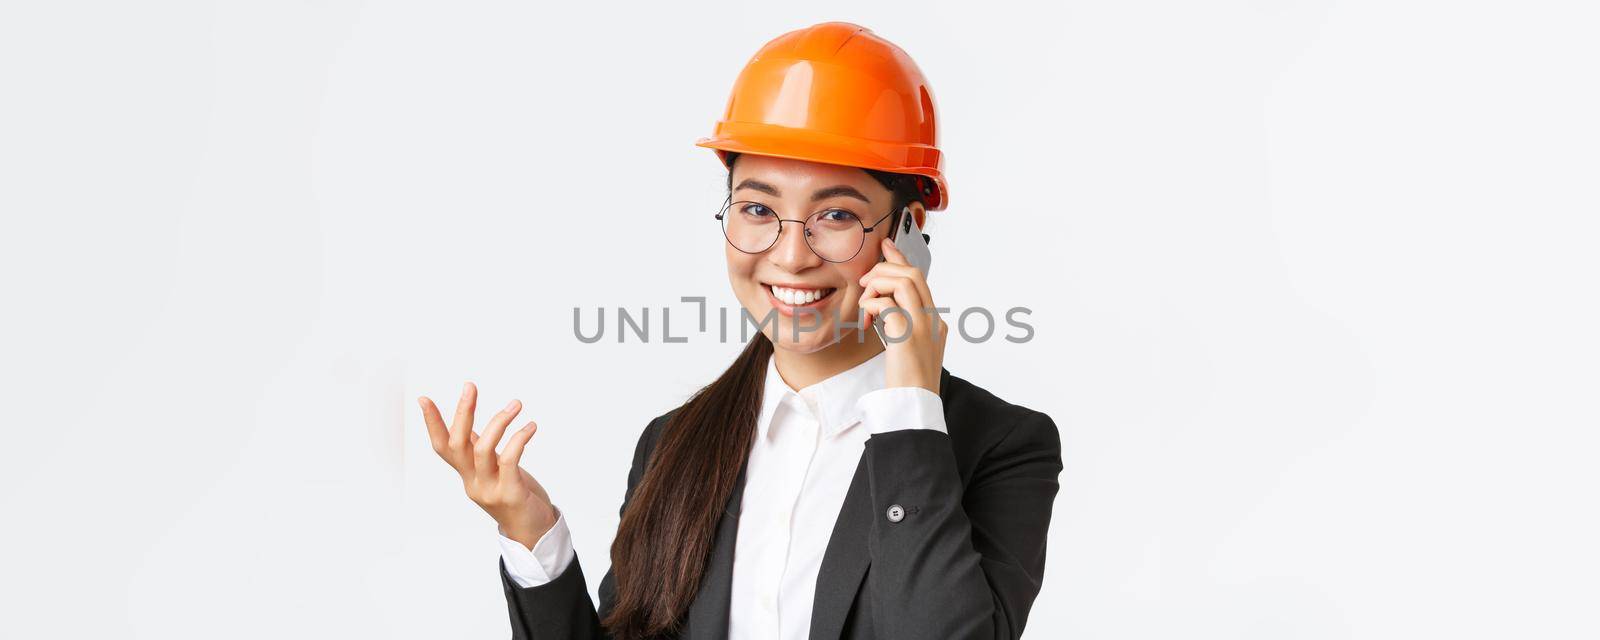 Close-up of asian businesswoman manage enterprise, engineer in safety helmet and suit having phone conversation, calling investors, smiling while talking over smartphone, white background.